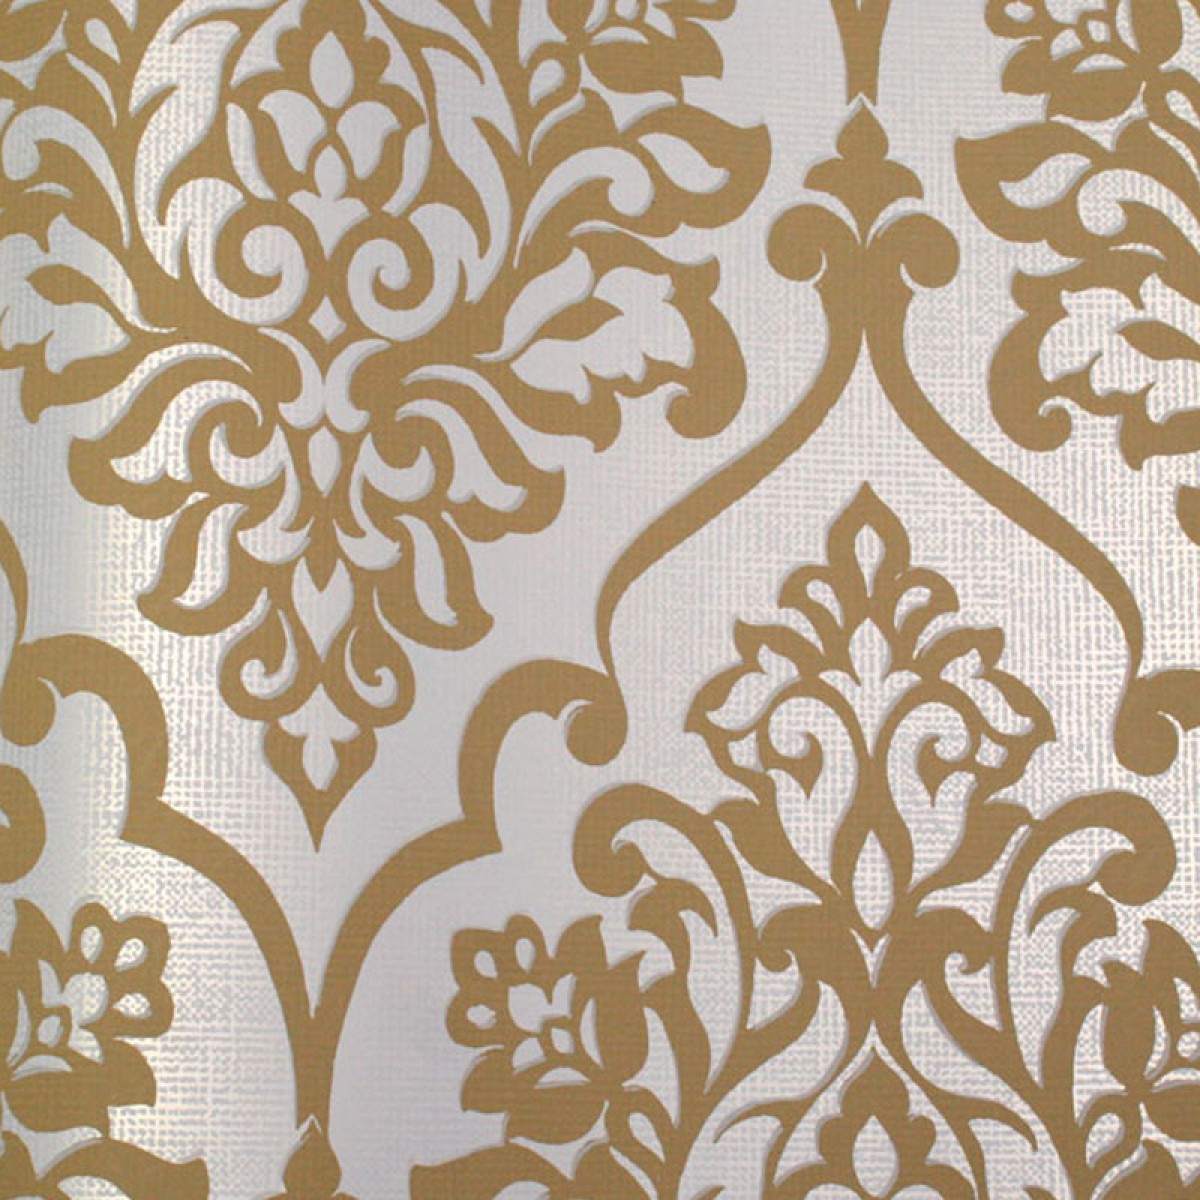 gold and silver wallpaper,pattern,wallpaper,brown,beige,wall